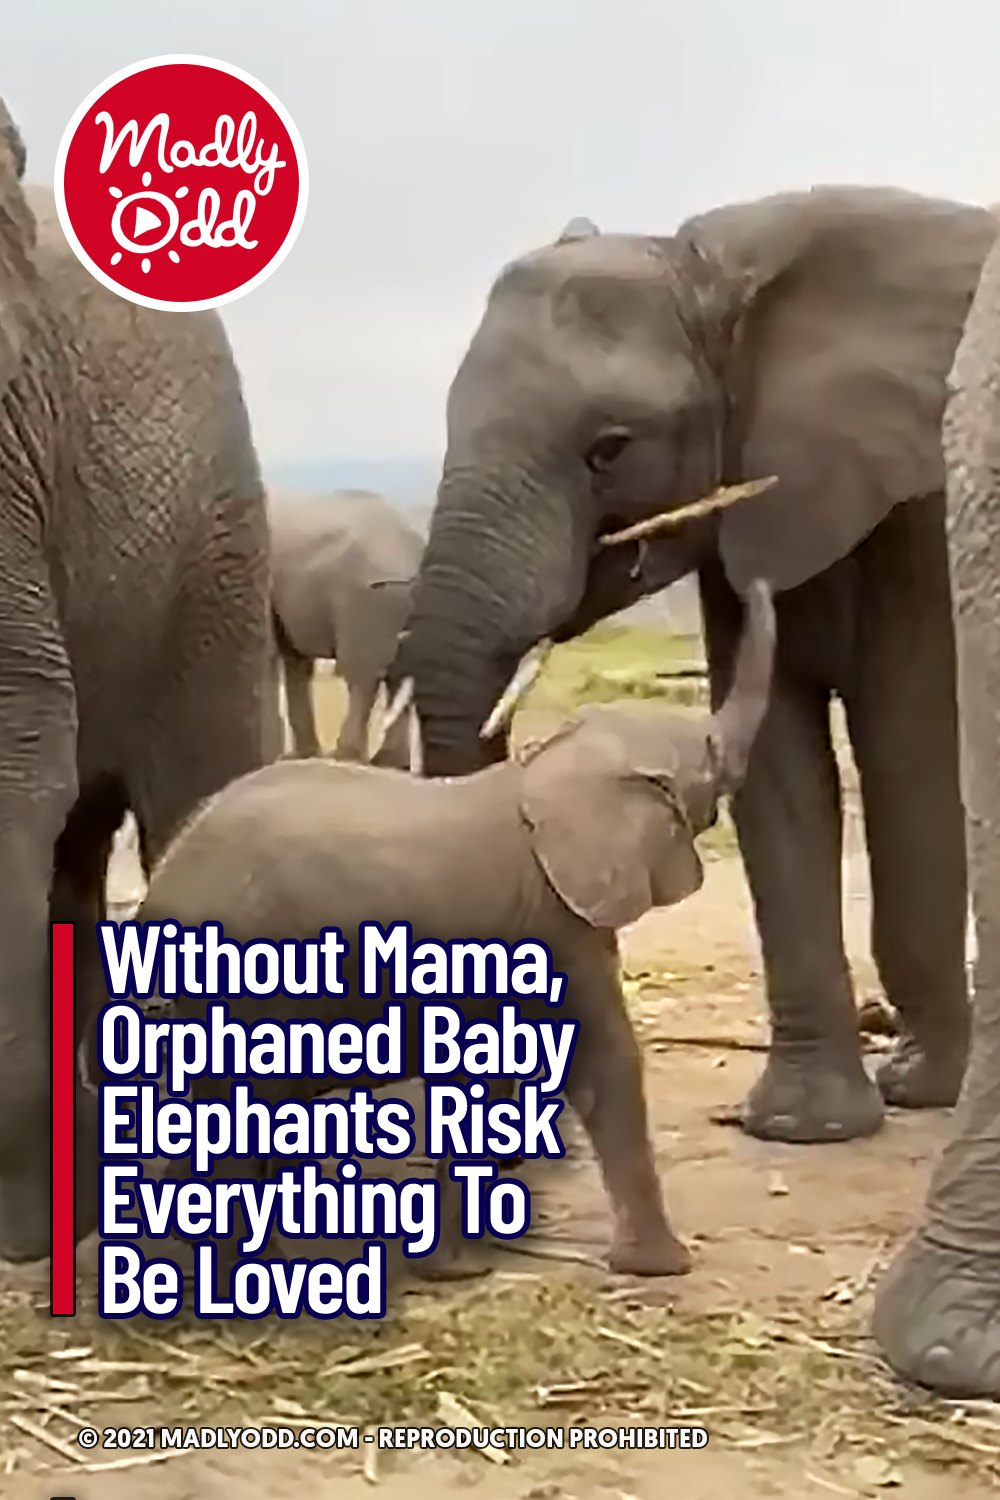 Without Mama, Orphaned Baby Elephants Risk Everything To Be Loved